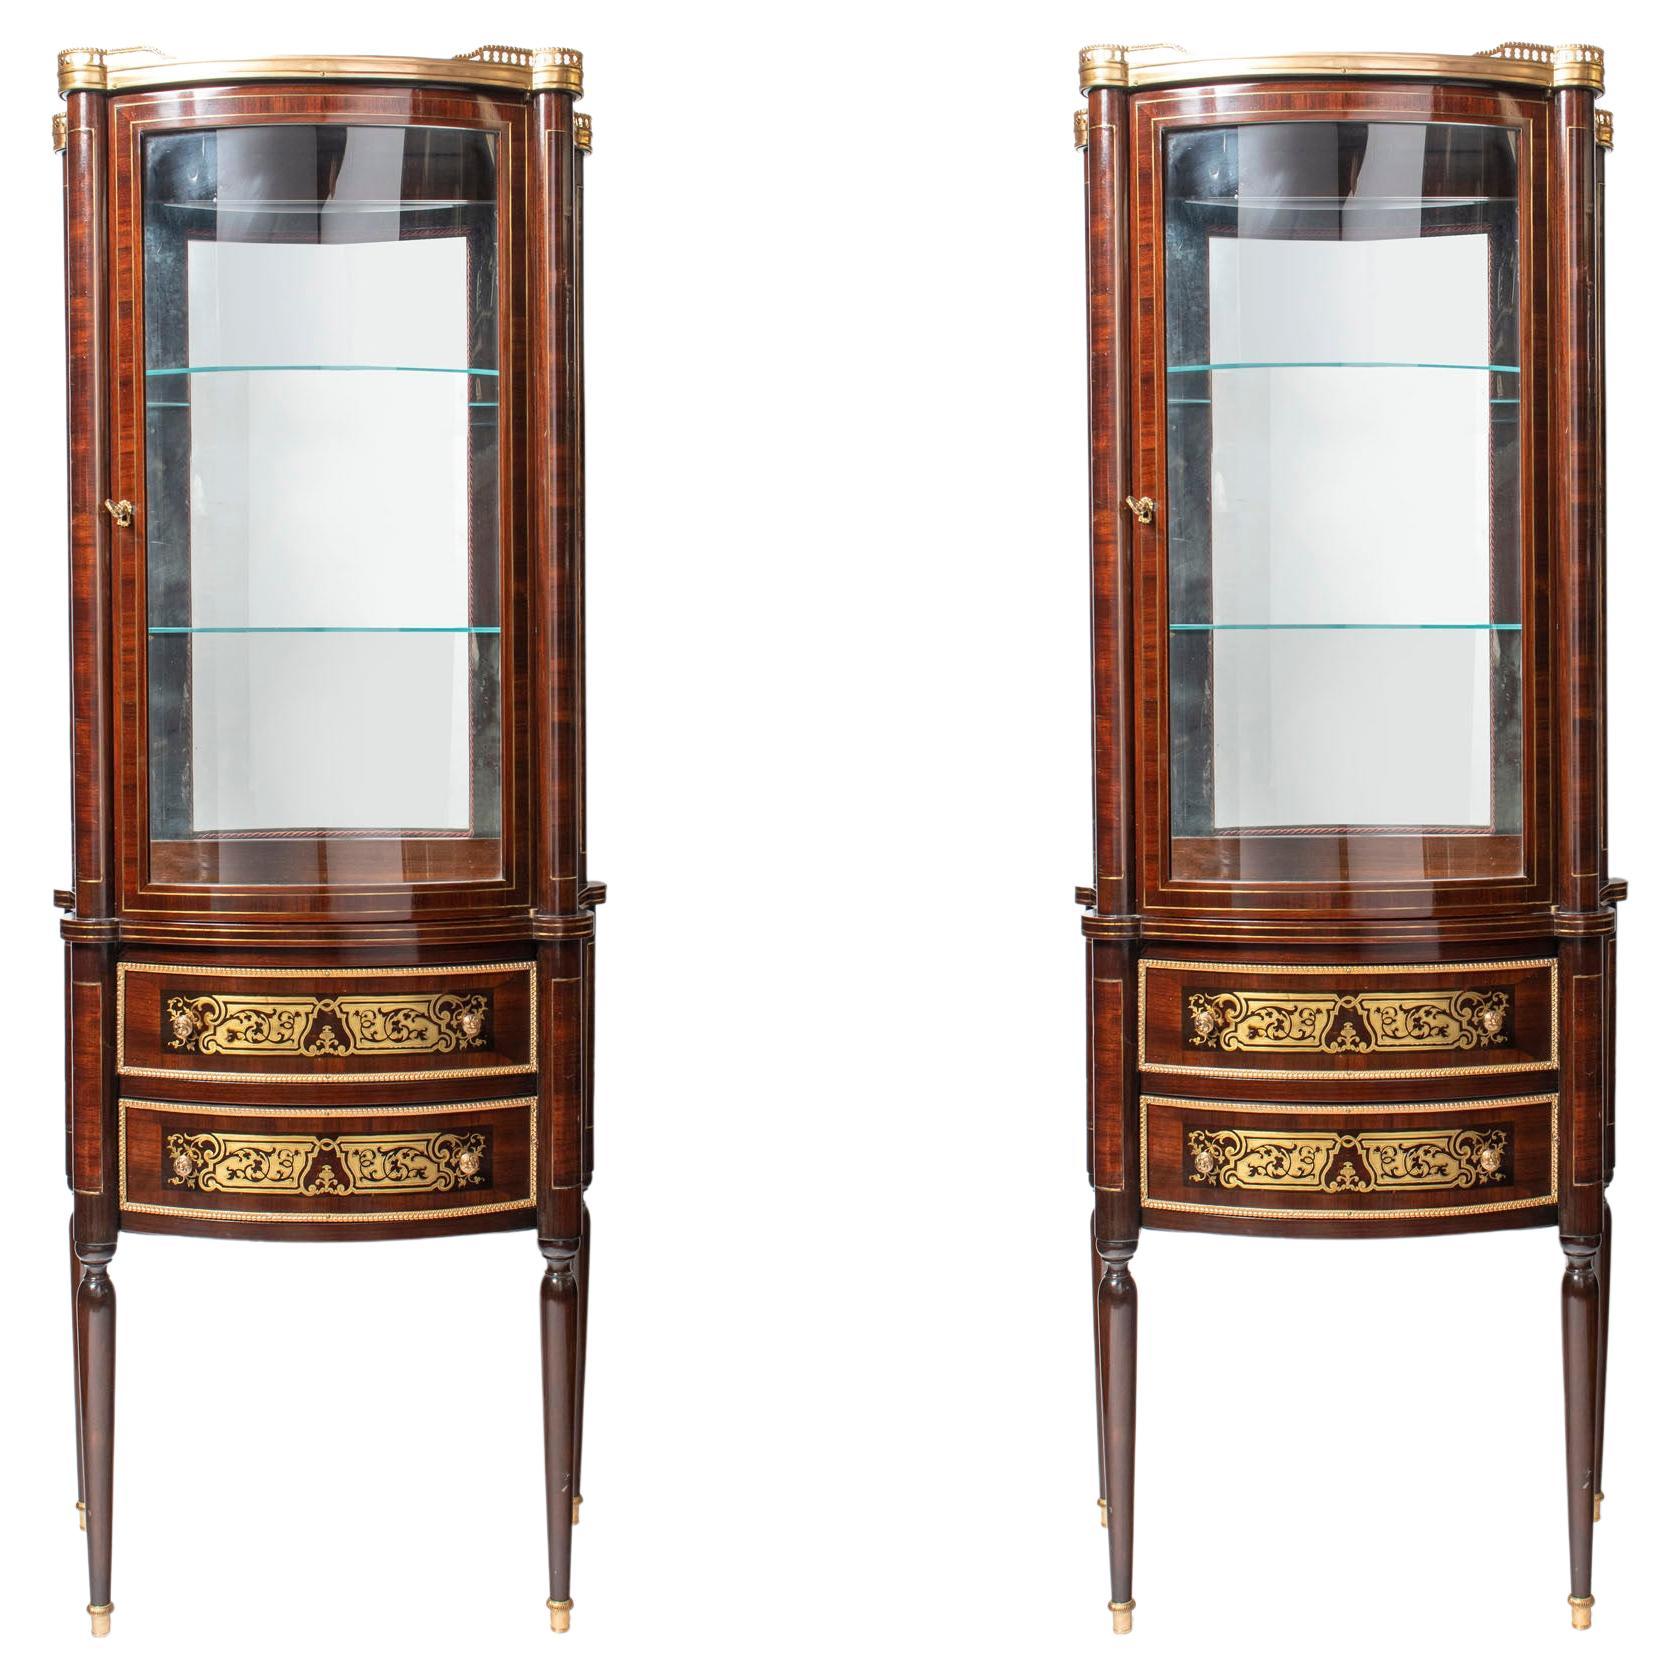 Pair of Wood, Bronze and Glass Showcases Vitrines, France, Late 19th Century For Sale